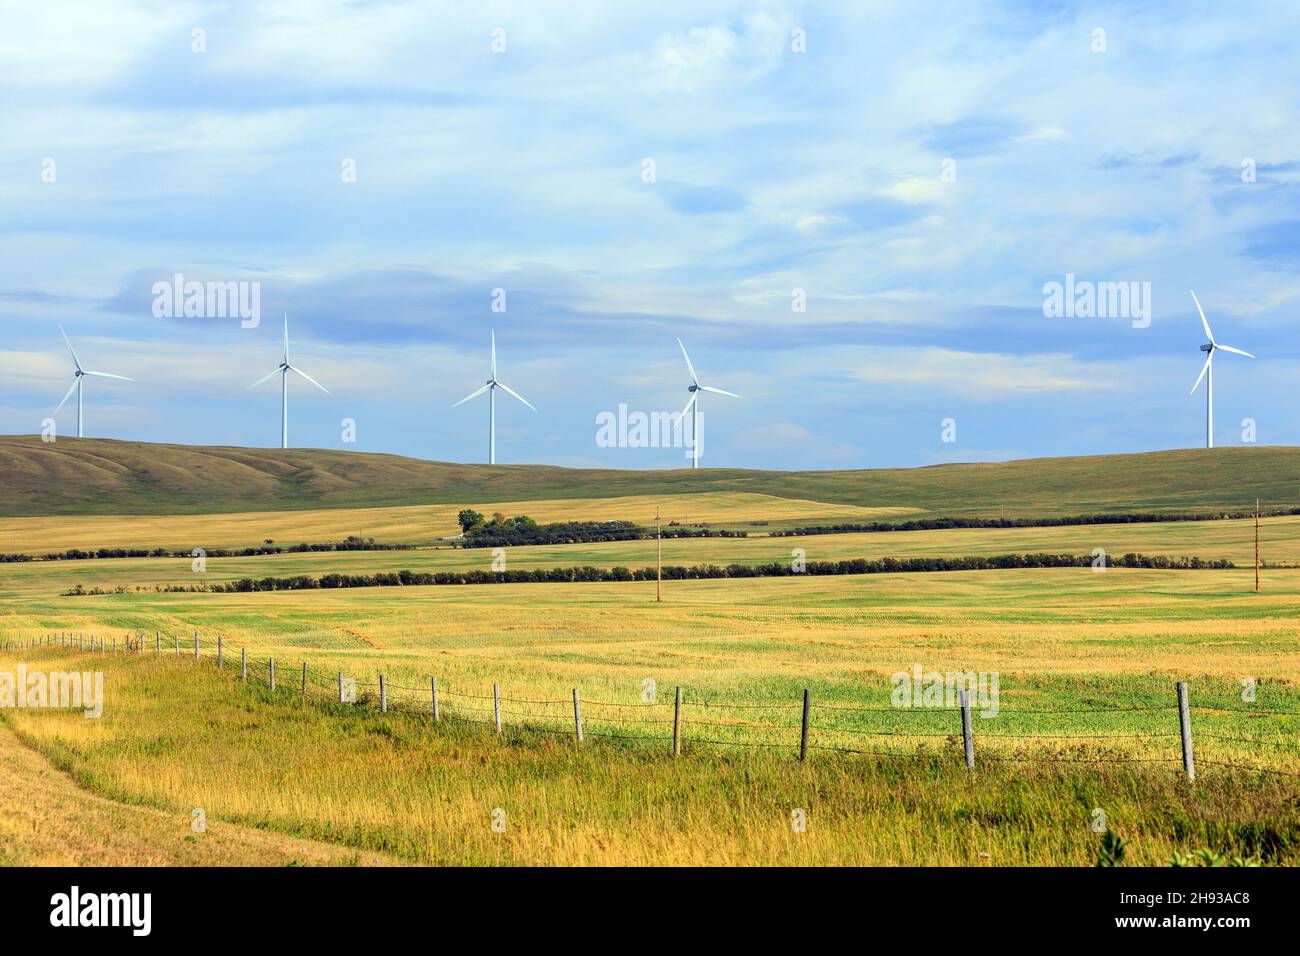 Wind power or wind energy is the use of wind turbines to generate electricity. Wind power is a popular, sustainable, renewable energy source. Stock Photo